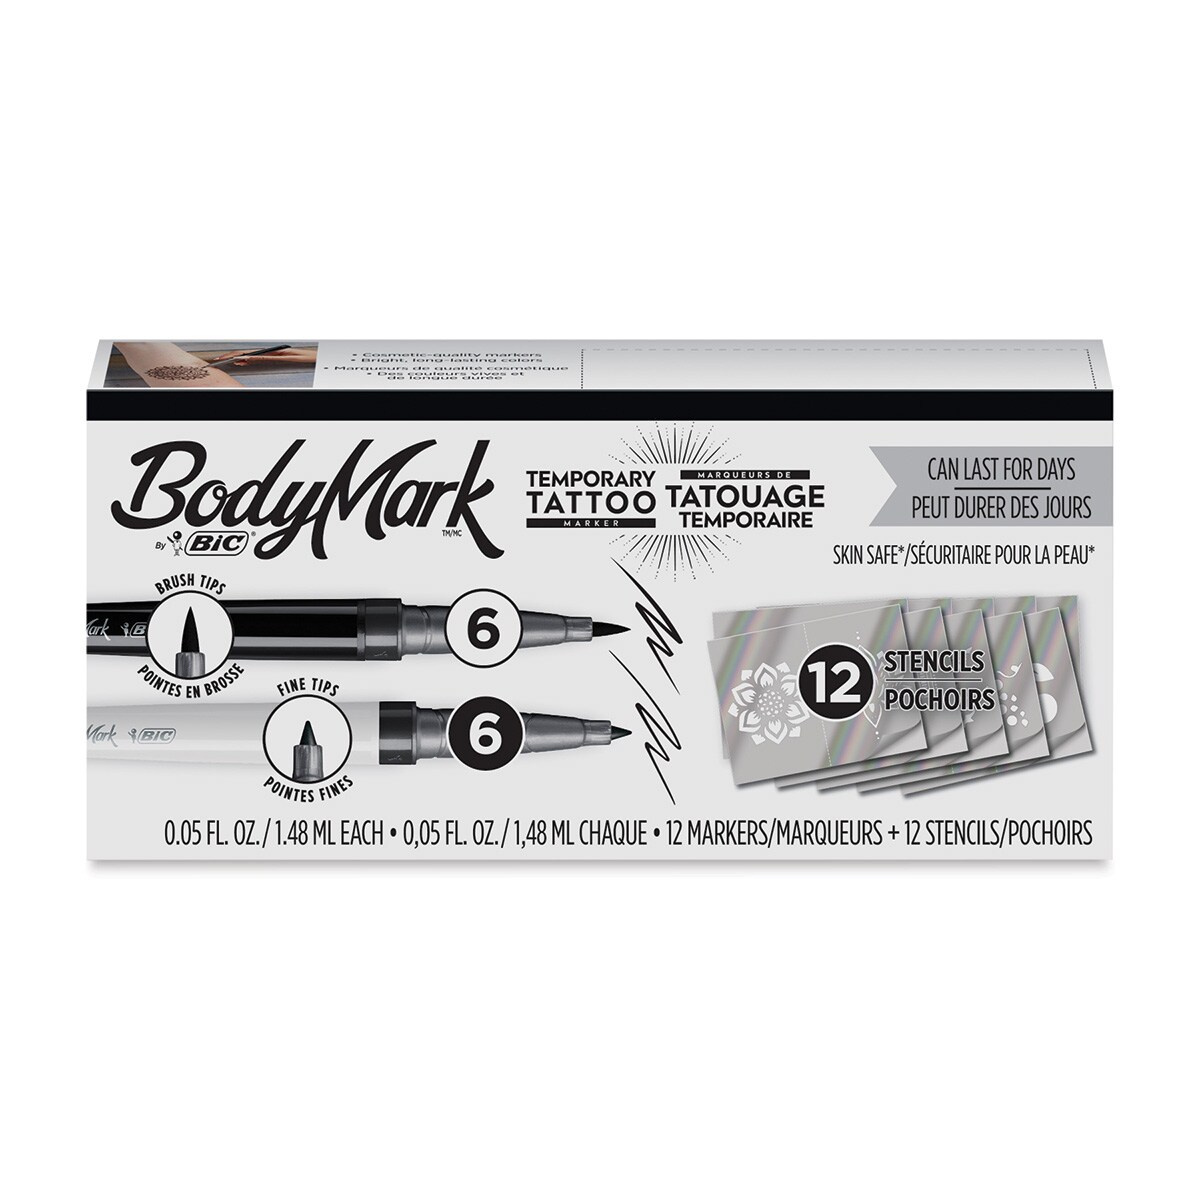 Bic BodyMark Temporary Tattoo Markers Ingredients and Reviews